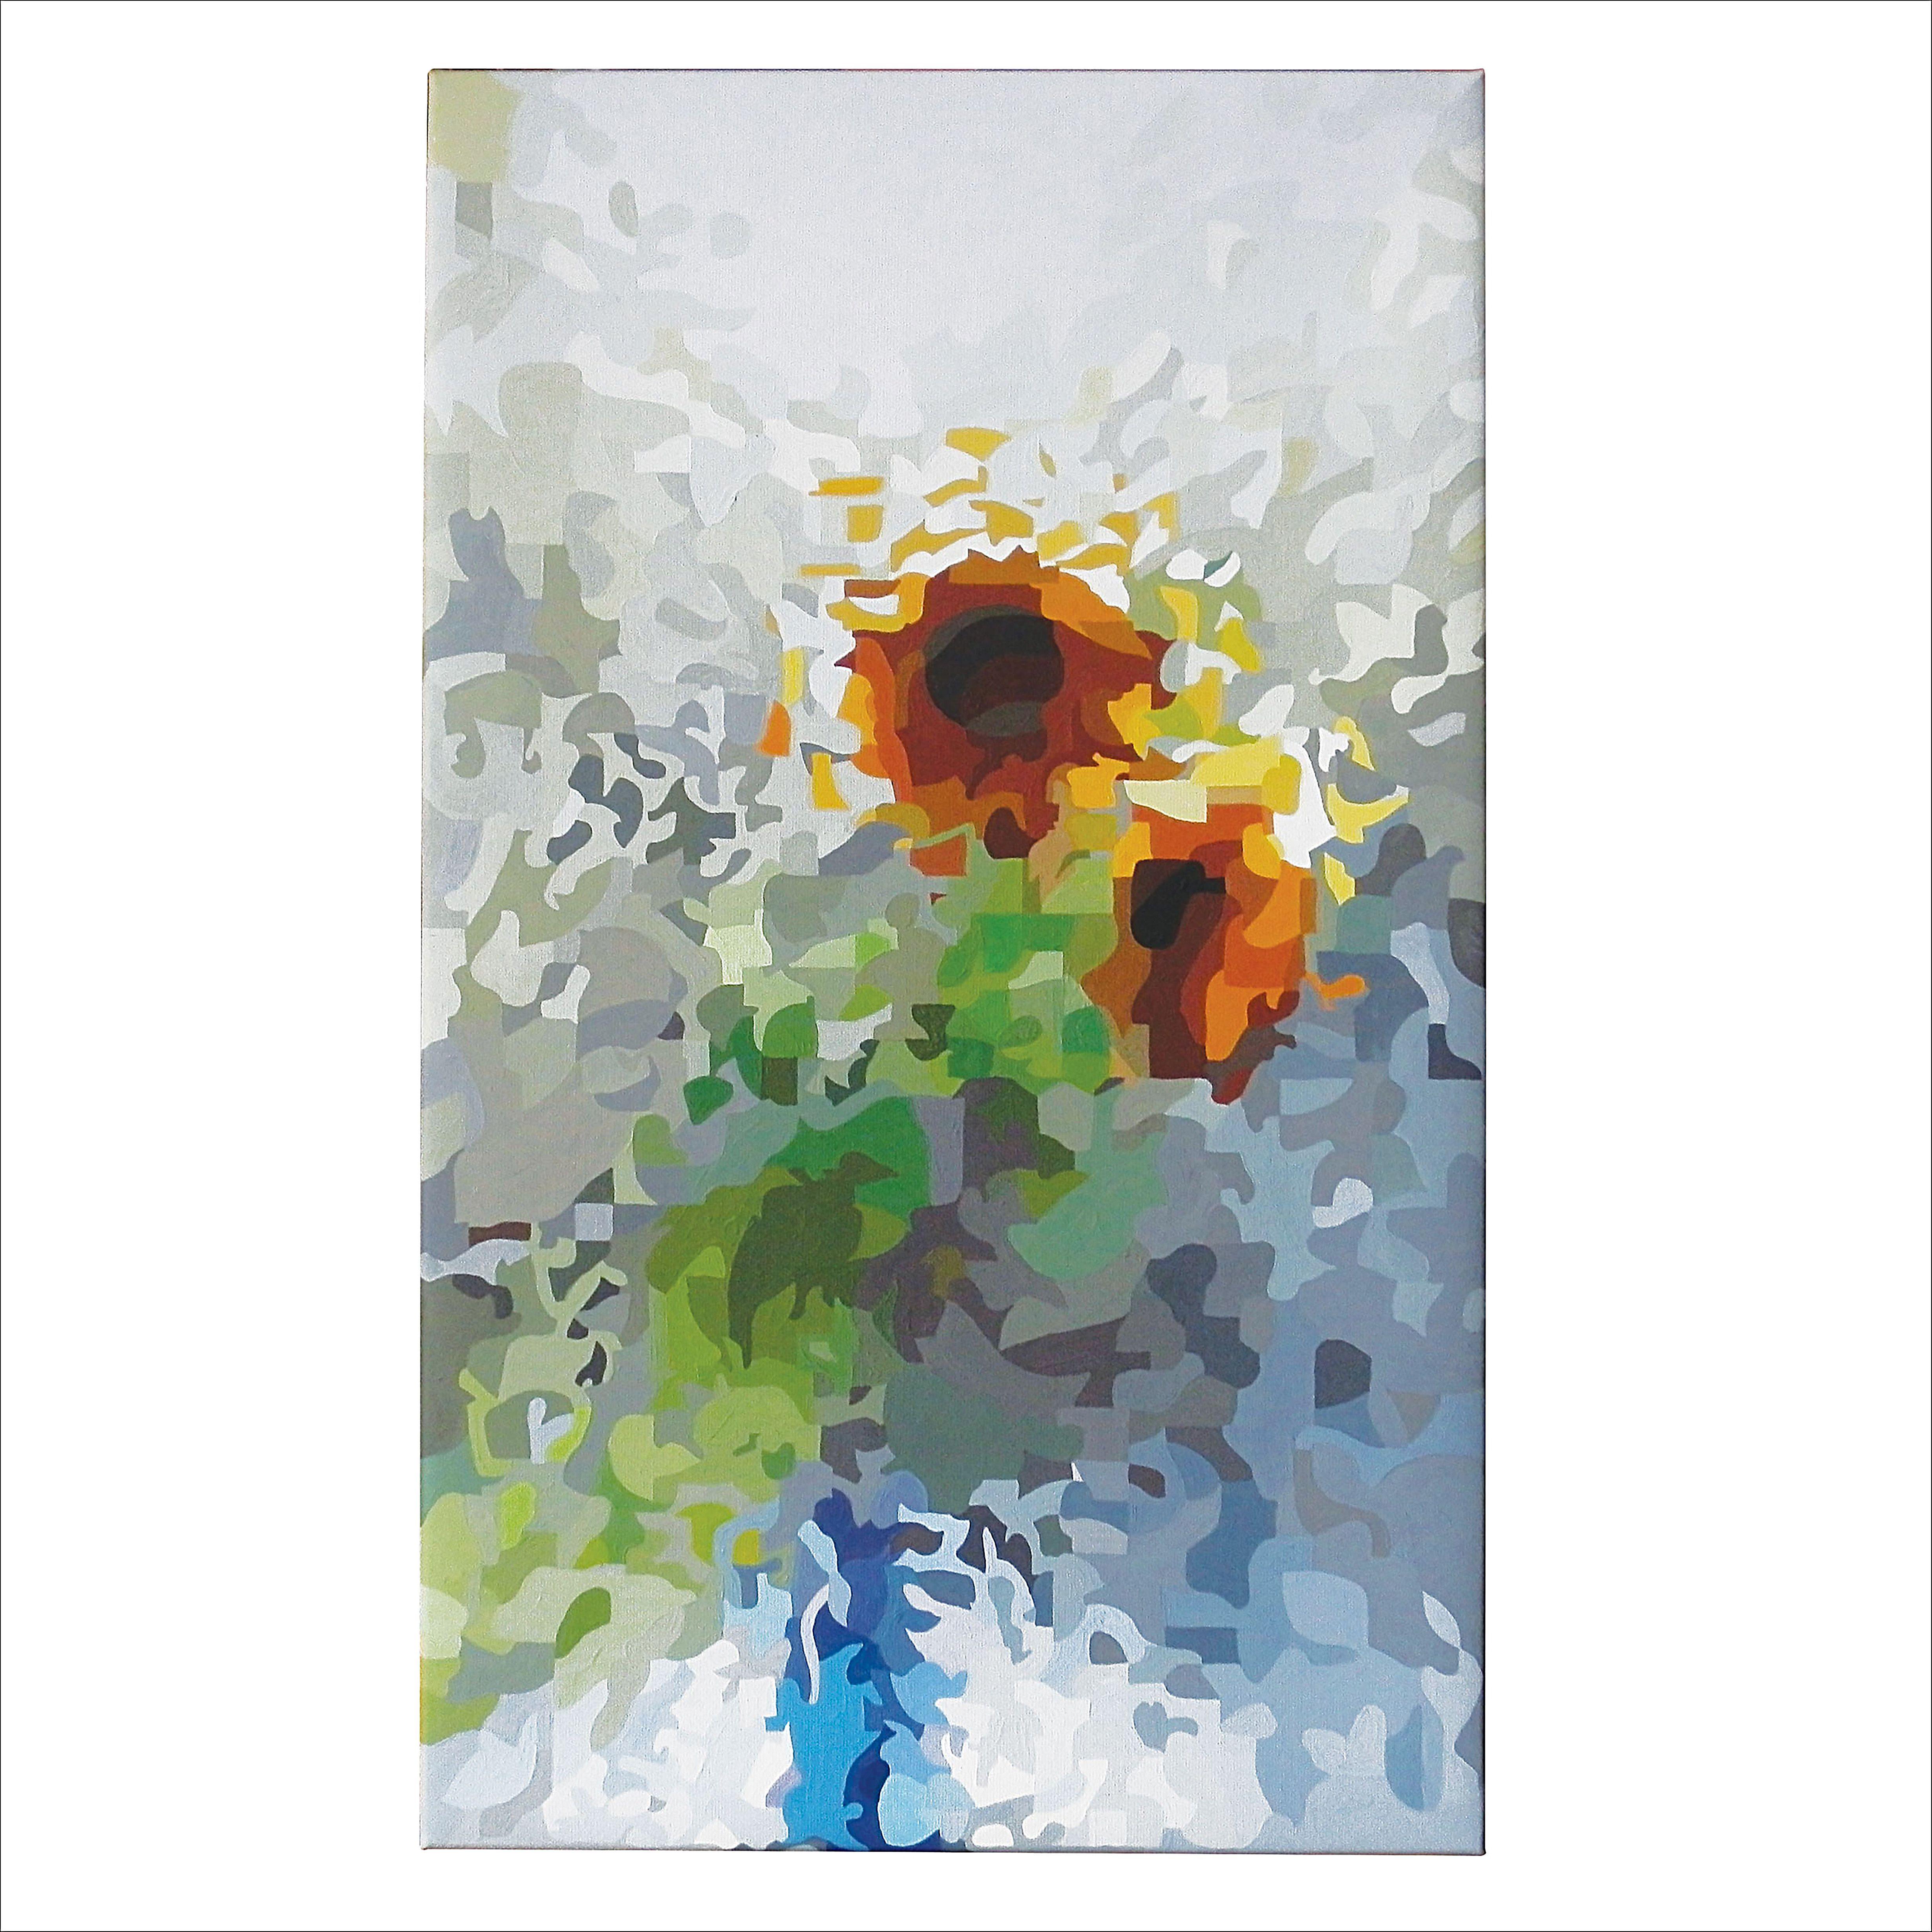 Sunflowers through a window. A distorted and evocative reality. :: Painting :: Contemporary :: This piece comes with an official certificate of authenticity signed by the artist :: Ready to Hang: Yes :: Signed: Yes :: Signature Location: Right